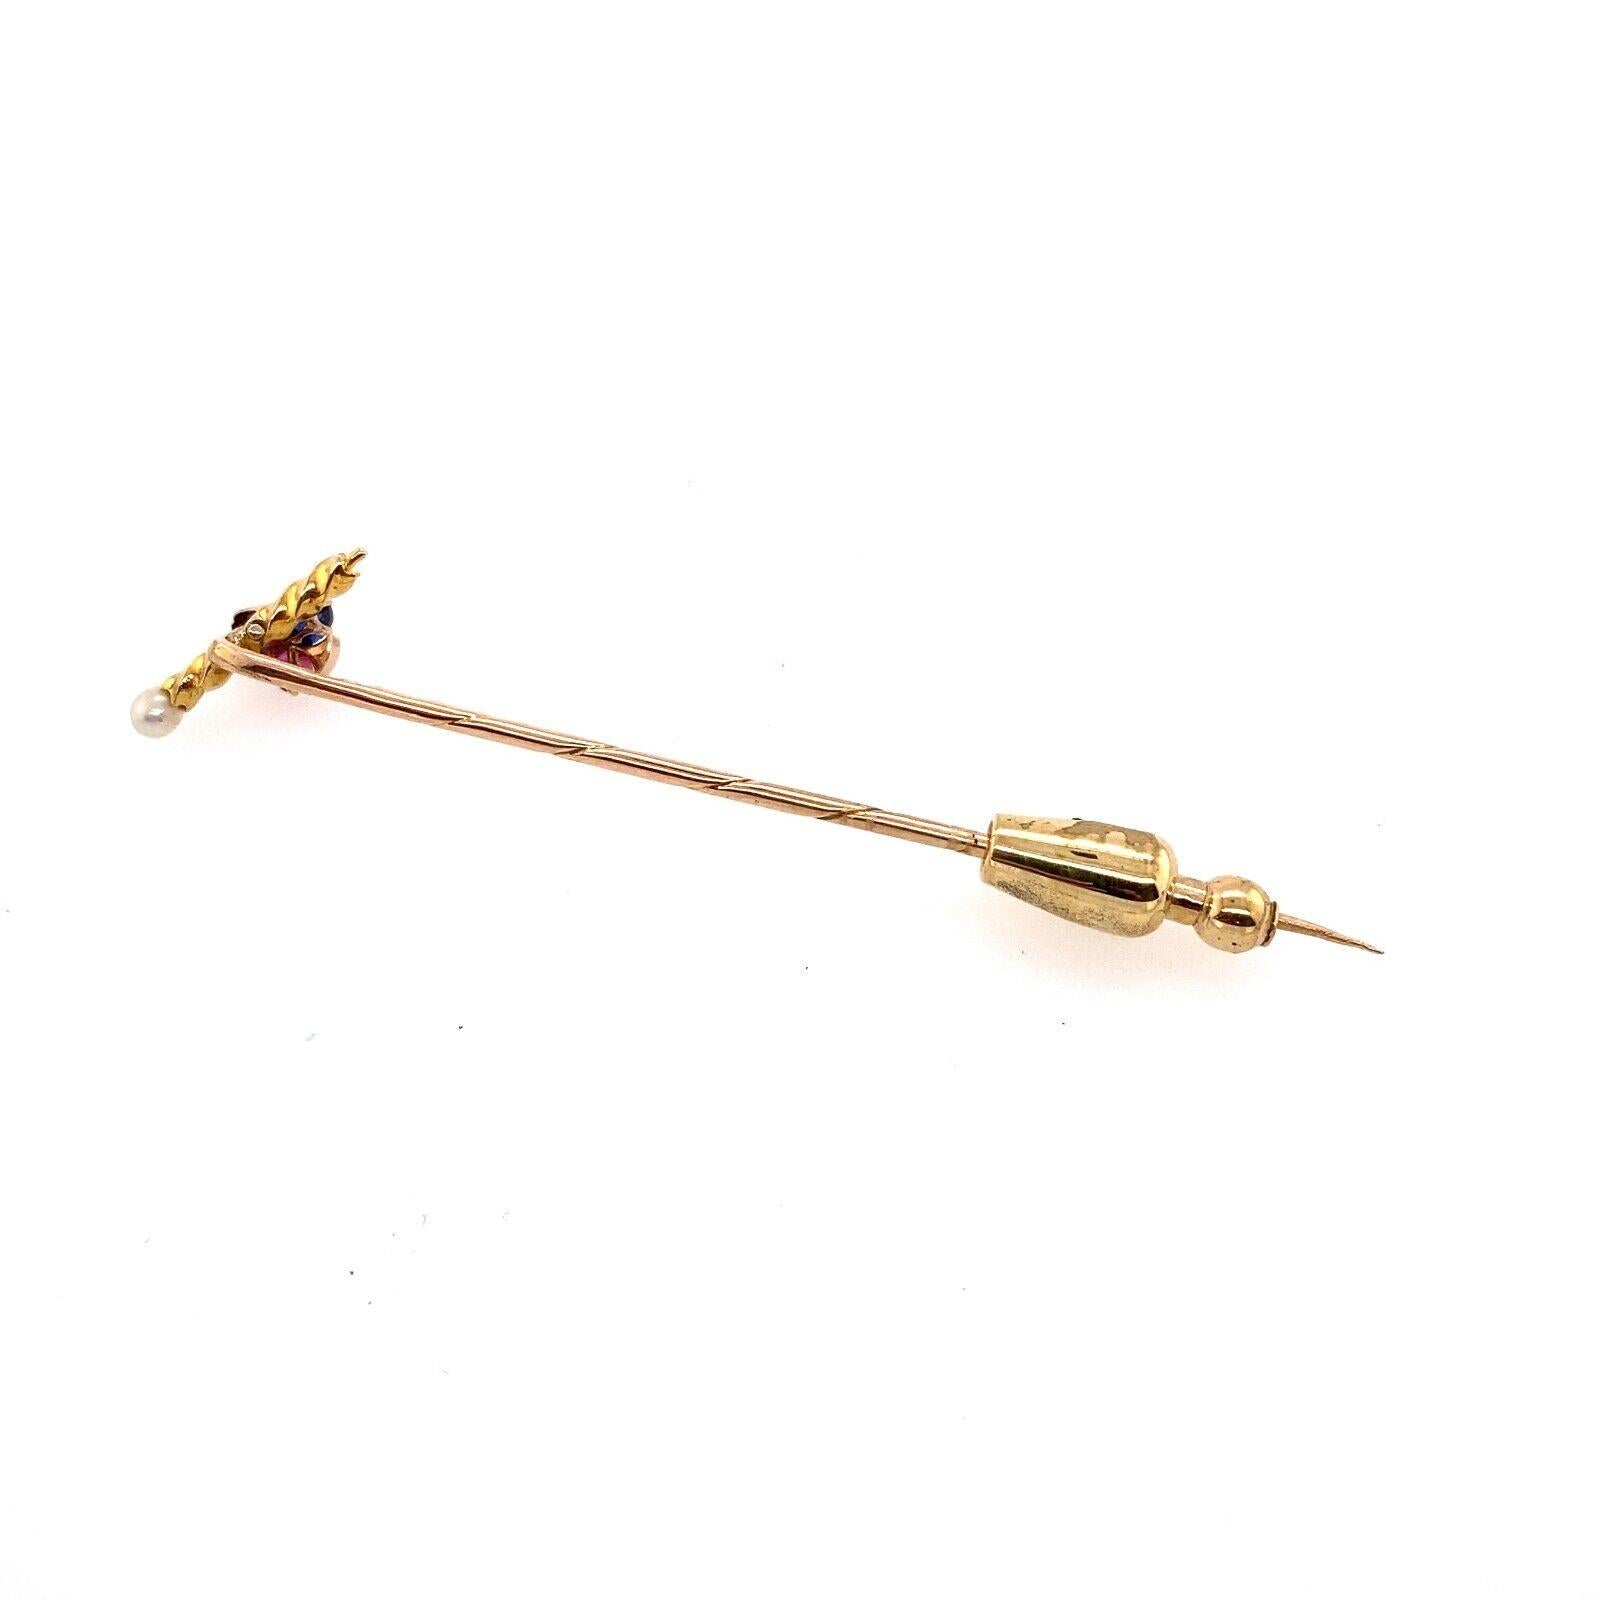 Antique 15ct Yellow Gold Stick Pin, Set With Ruby, Sapphire, Pearl & Diamond

This elegant Victorian cut Diamond 0.04ct stickpin in 15ct Yellow Gold set with a Ruby, Sapphire, Pearl and a Diamond. It's a timeless piece that can be kept in your